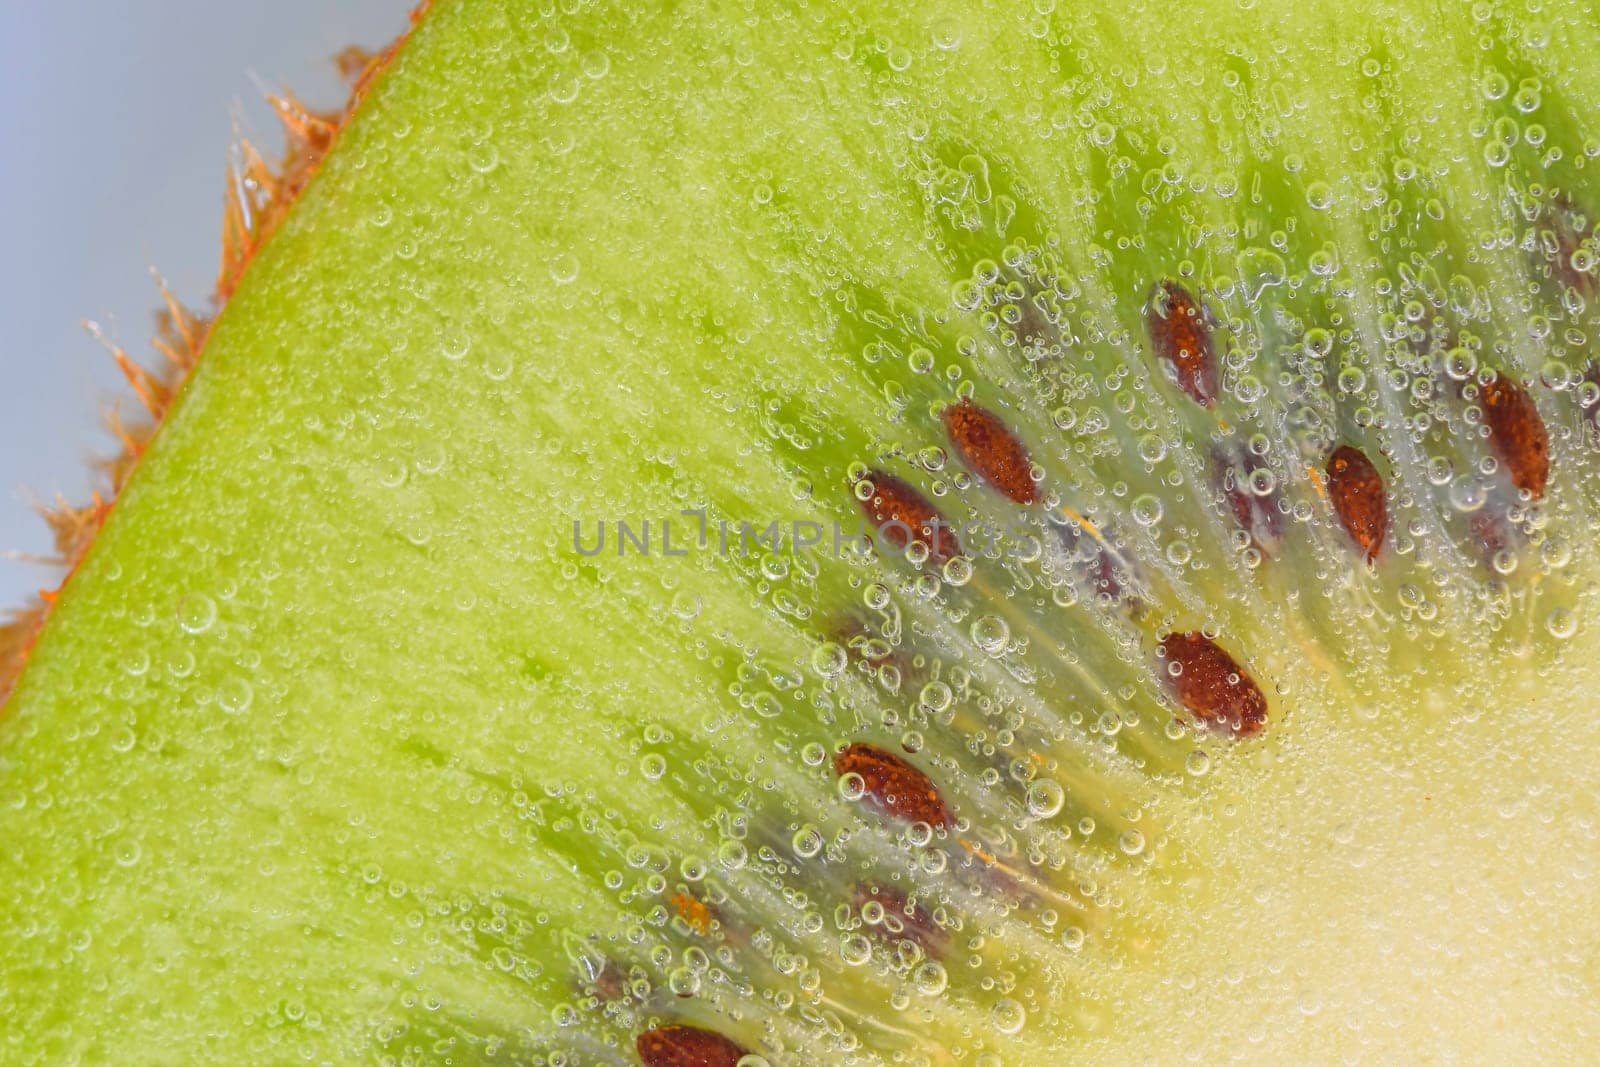 Slice of ripe kiwi fruit in water. Close-up of kiwi fruit in liquid with bubbles. Slice of ripe kiwi in sparkling water. Macro image of fruit in carbonated water